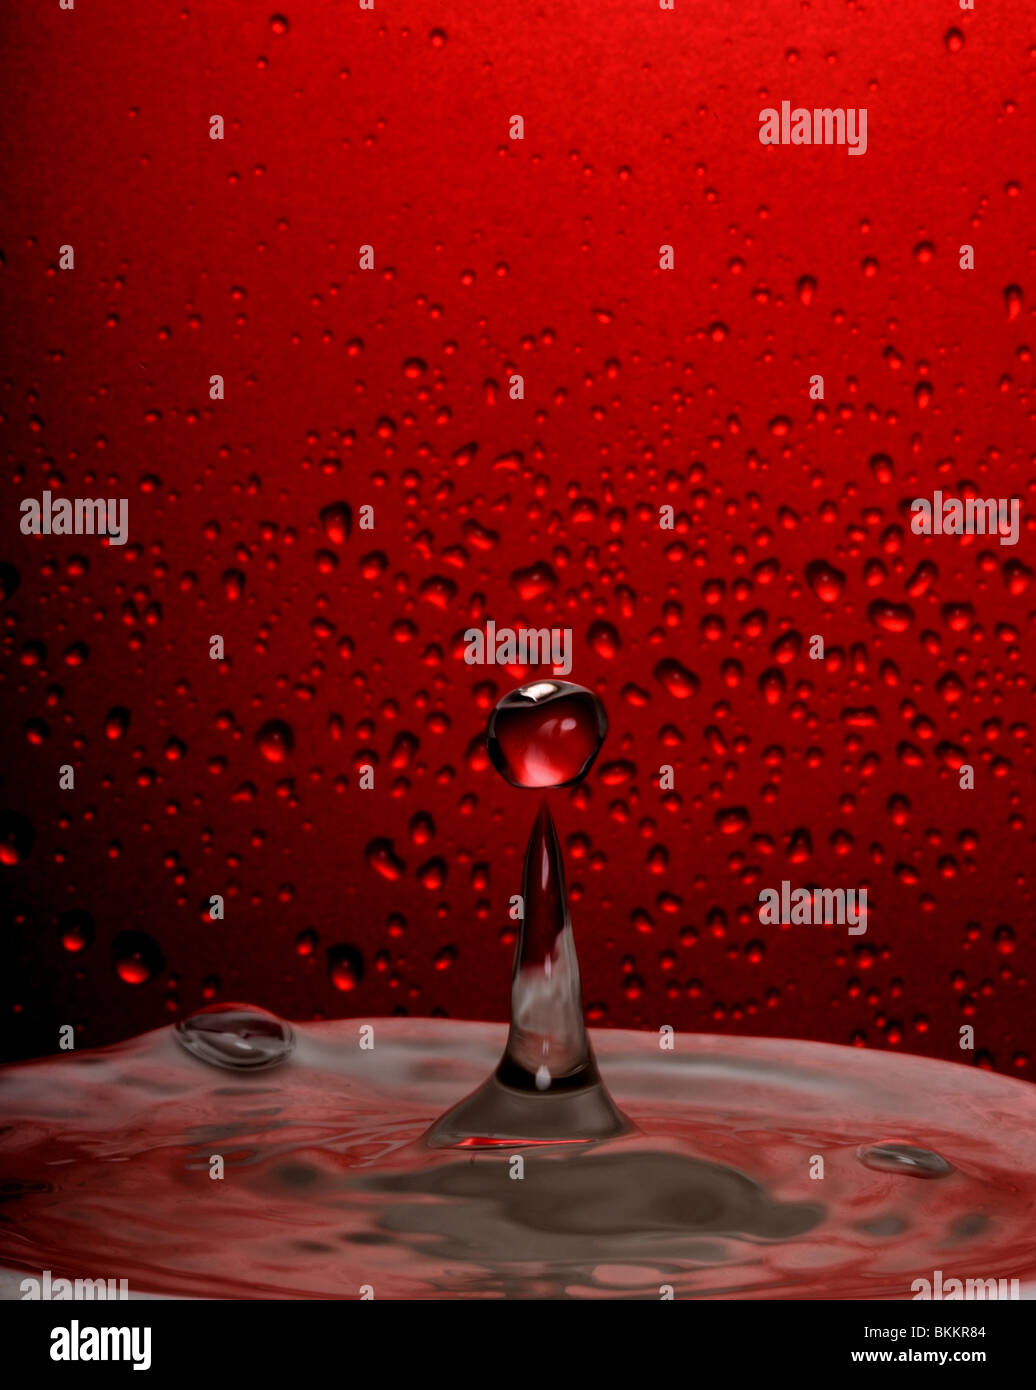 Red, Water, Water Drop, High-speed Photography, Pinnacle of Success Stock Photo